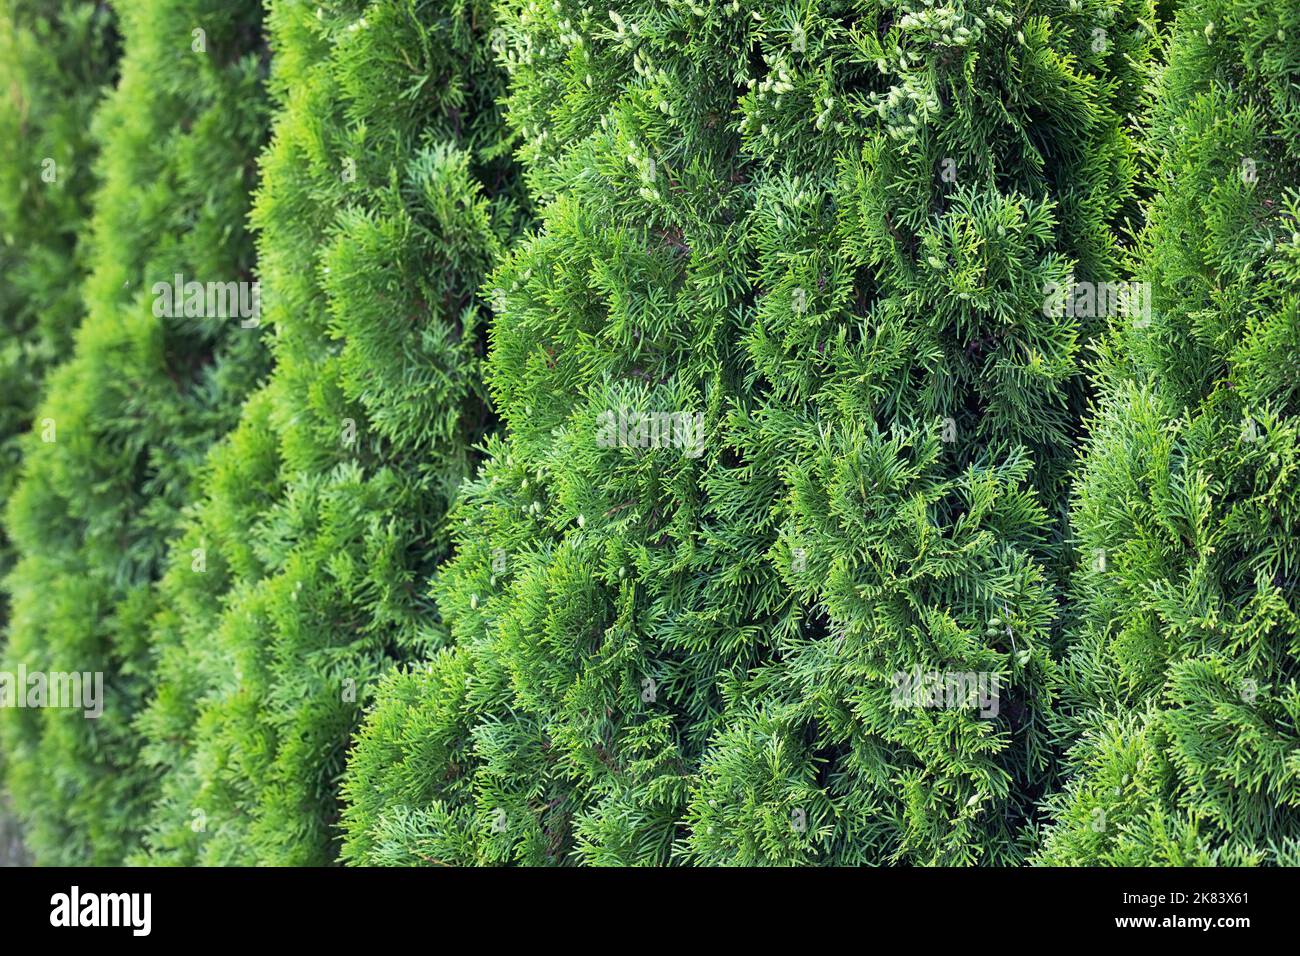 Green abstract thuja background, thuja tree for garden decoration Stock Photo